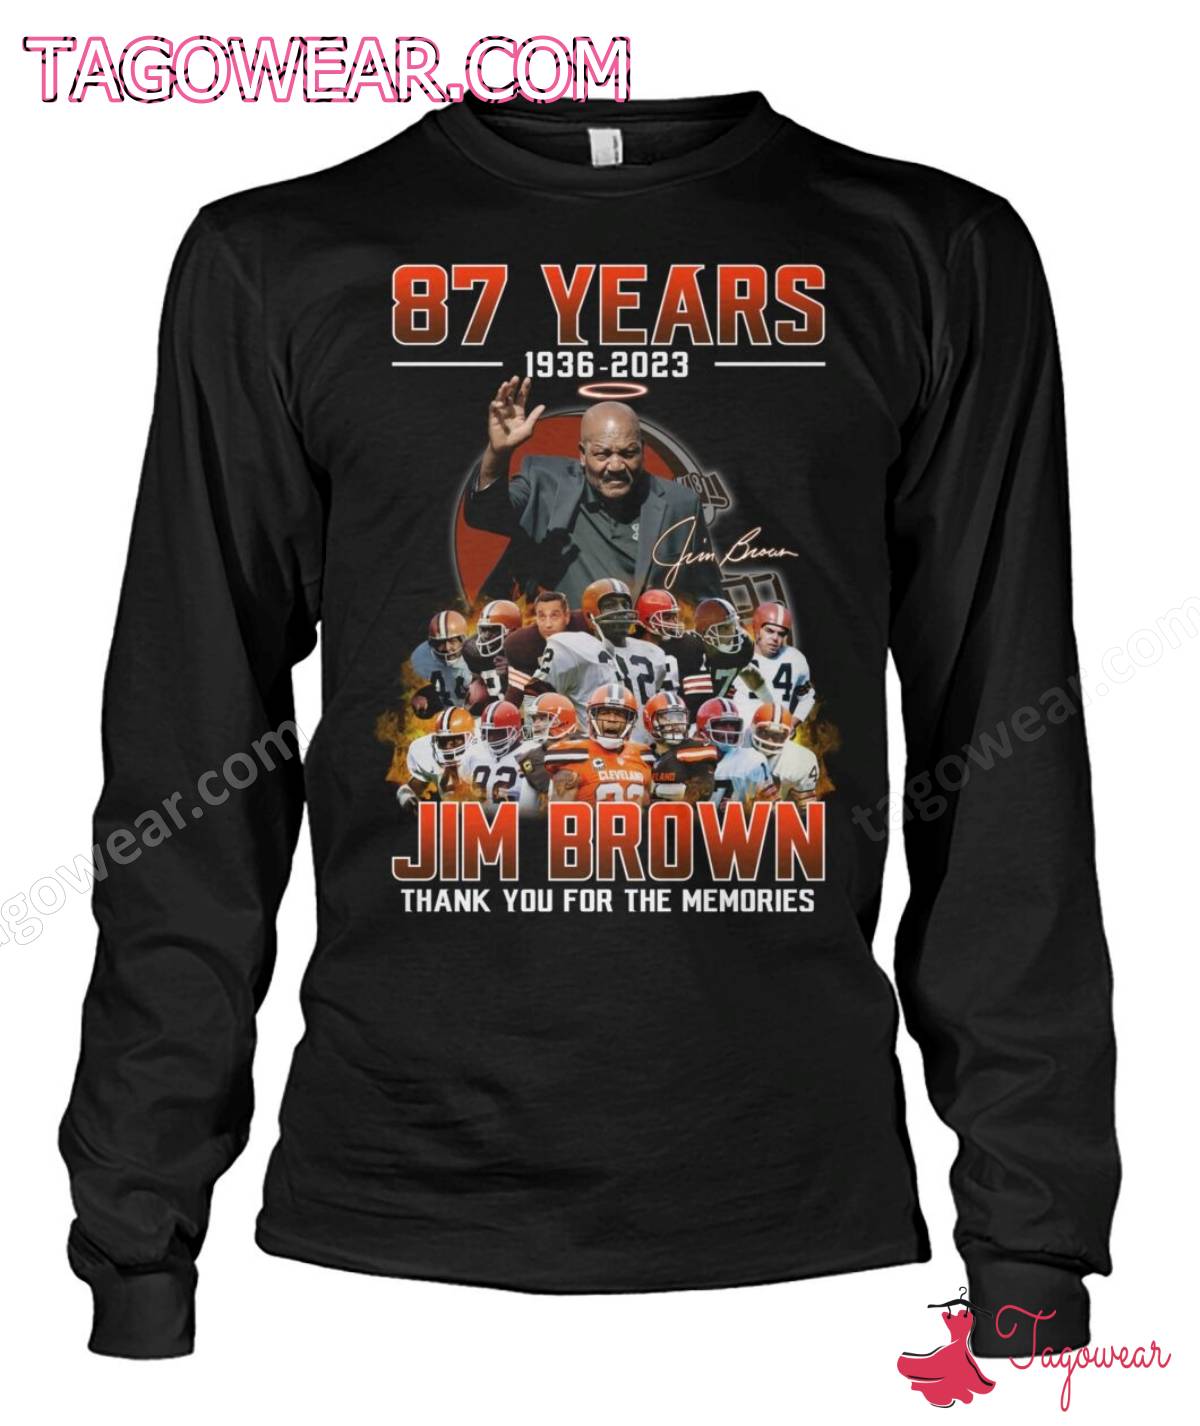 87 Years 1936-2023 Jim Brown Thank You For The Memories Shirt a